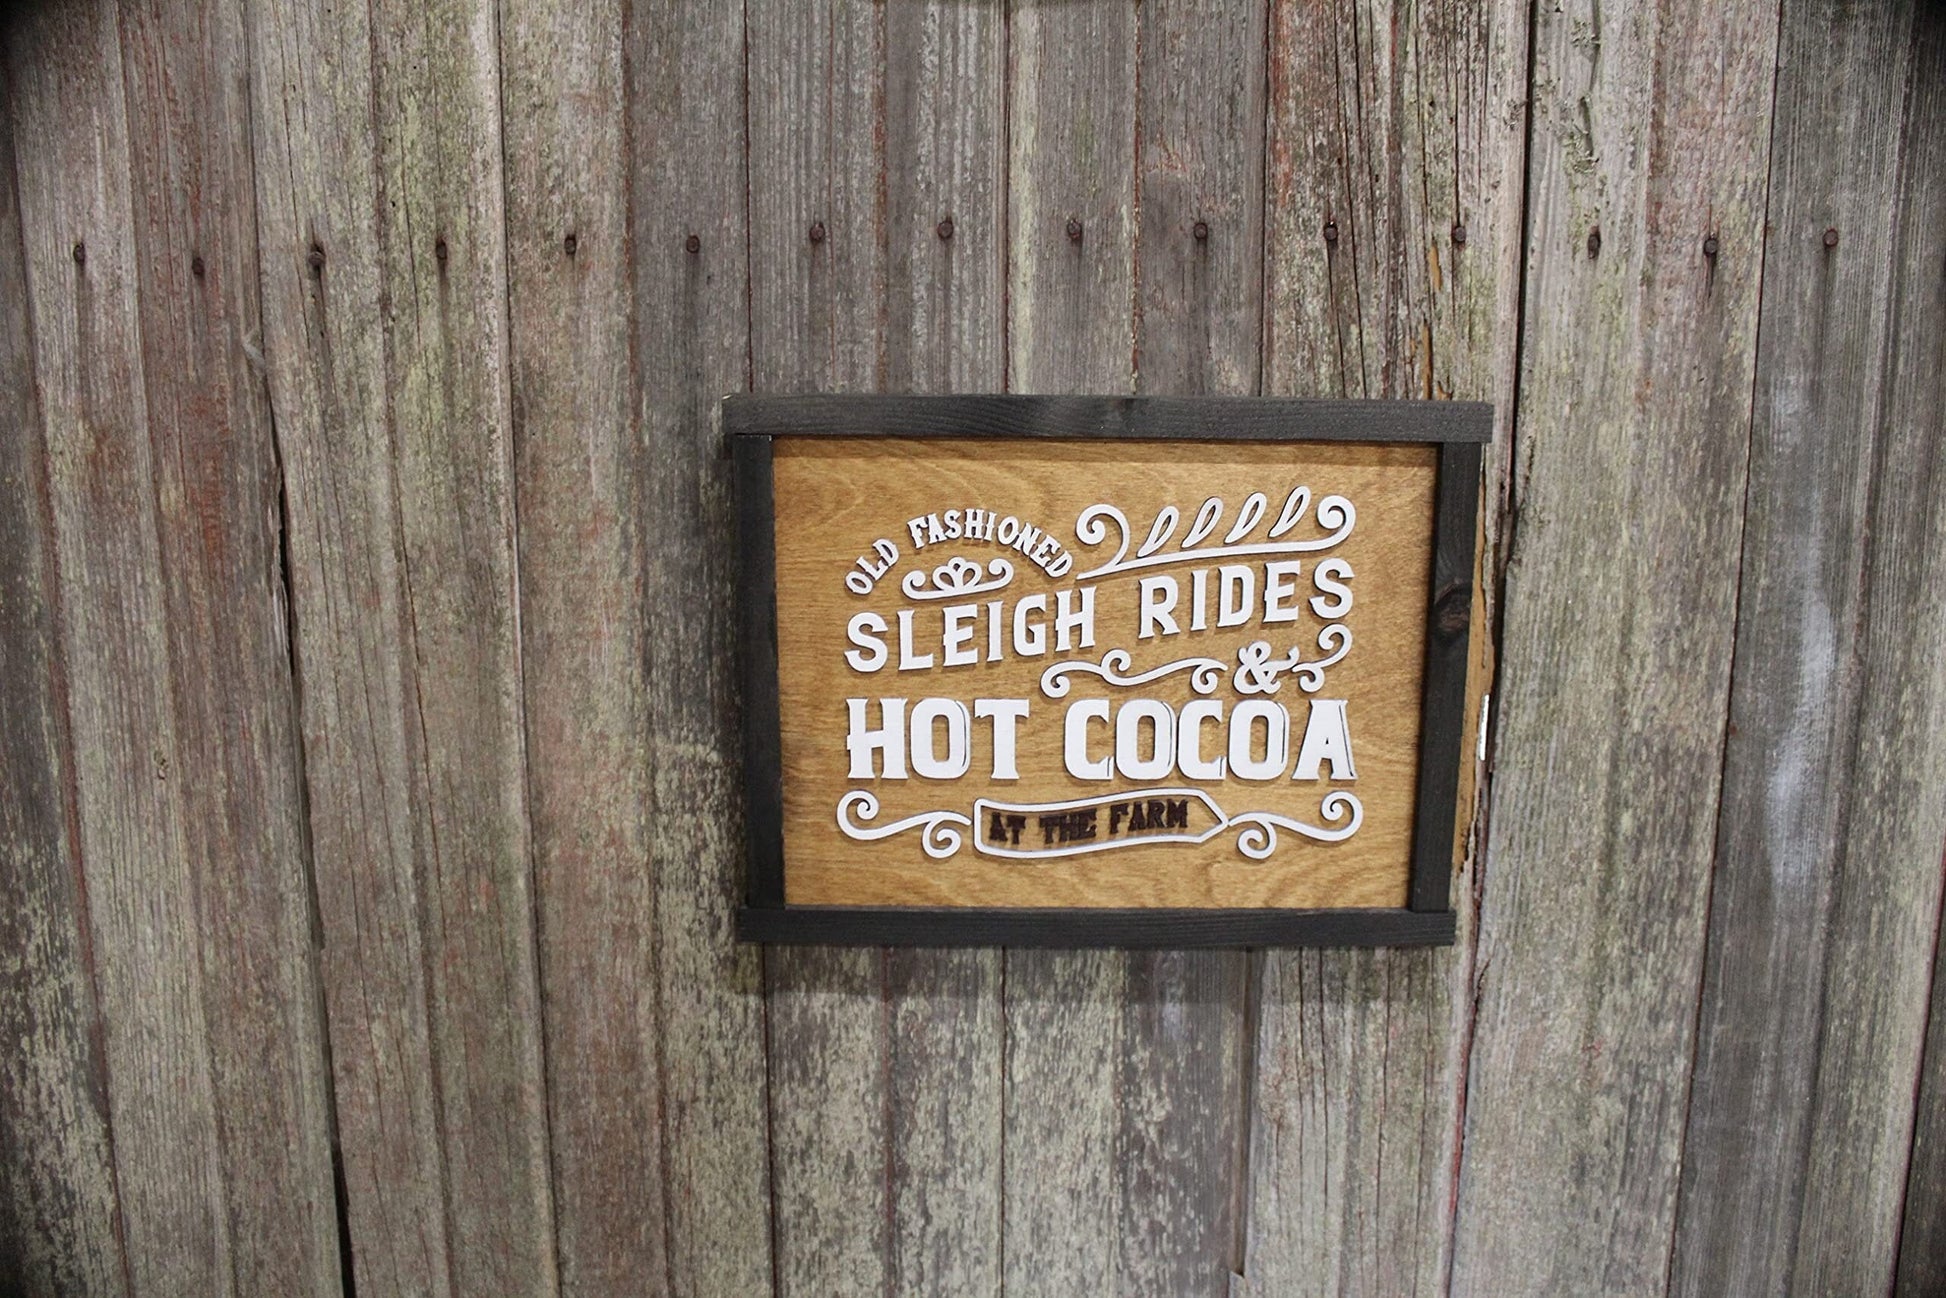 Sleigh Rides Hot Cocoa Wood Sign Chocolate Winter Cold Brr On The Farm Christmas Advertising Sign 3D Raised Text Country Cabin Decor